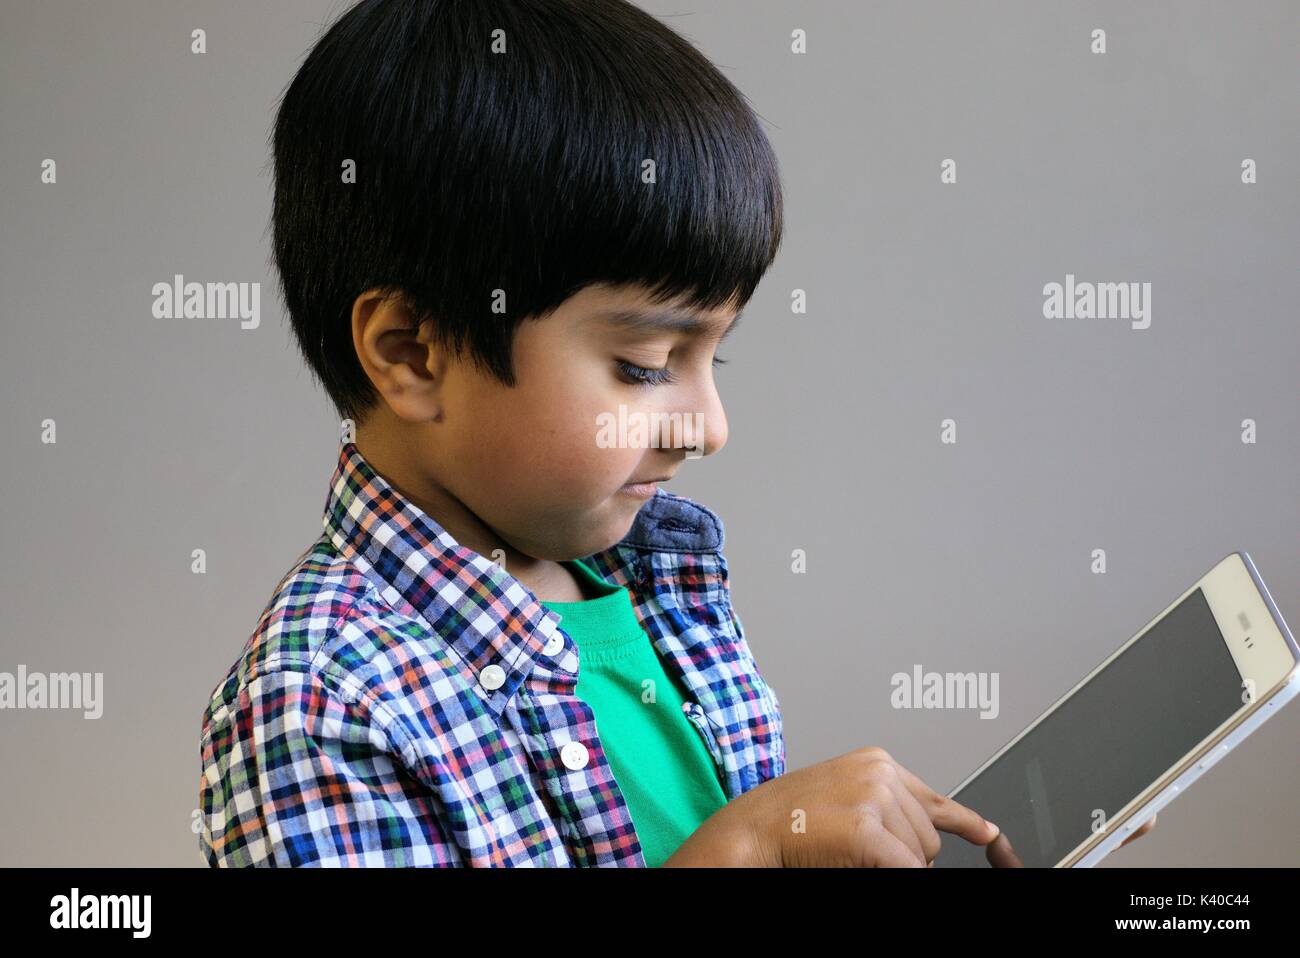 Kid using technology shot in natural light. Kid wearing headphones looking at tablet computer. Child with headphones using tablet. Stock Photo